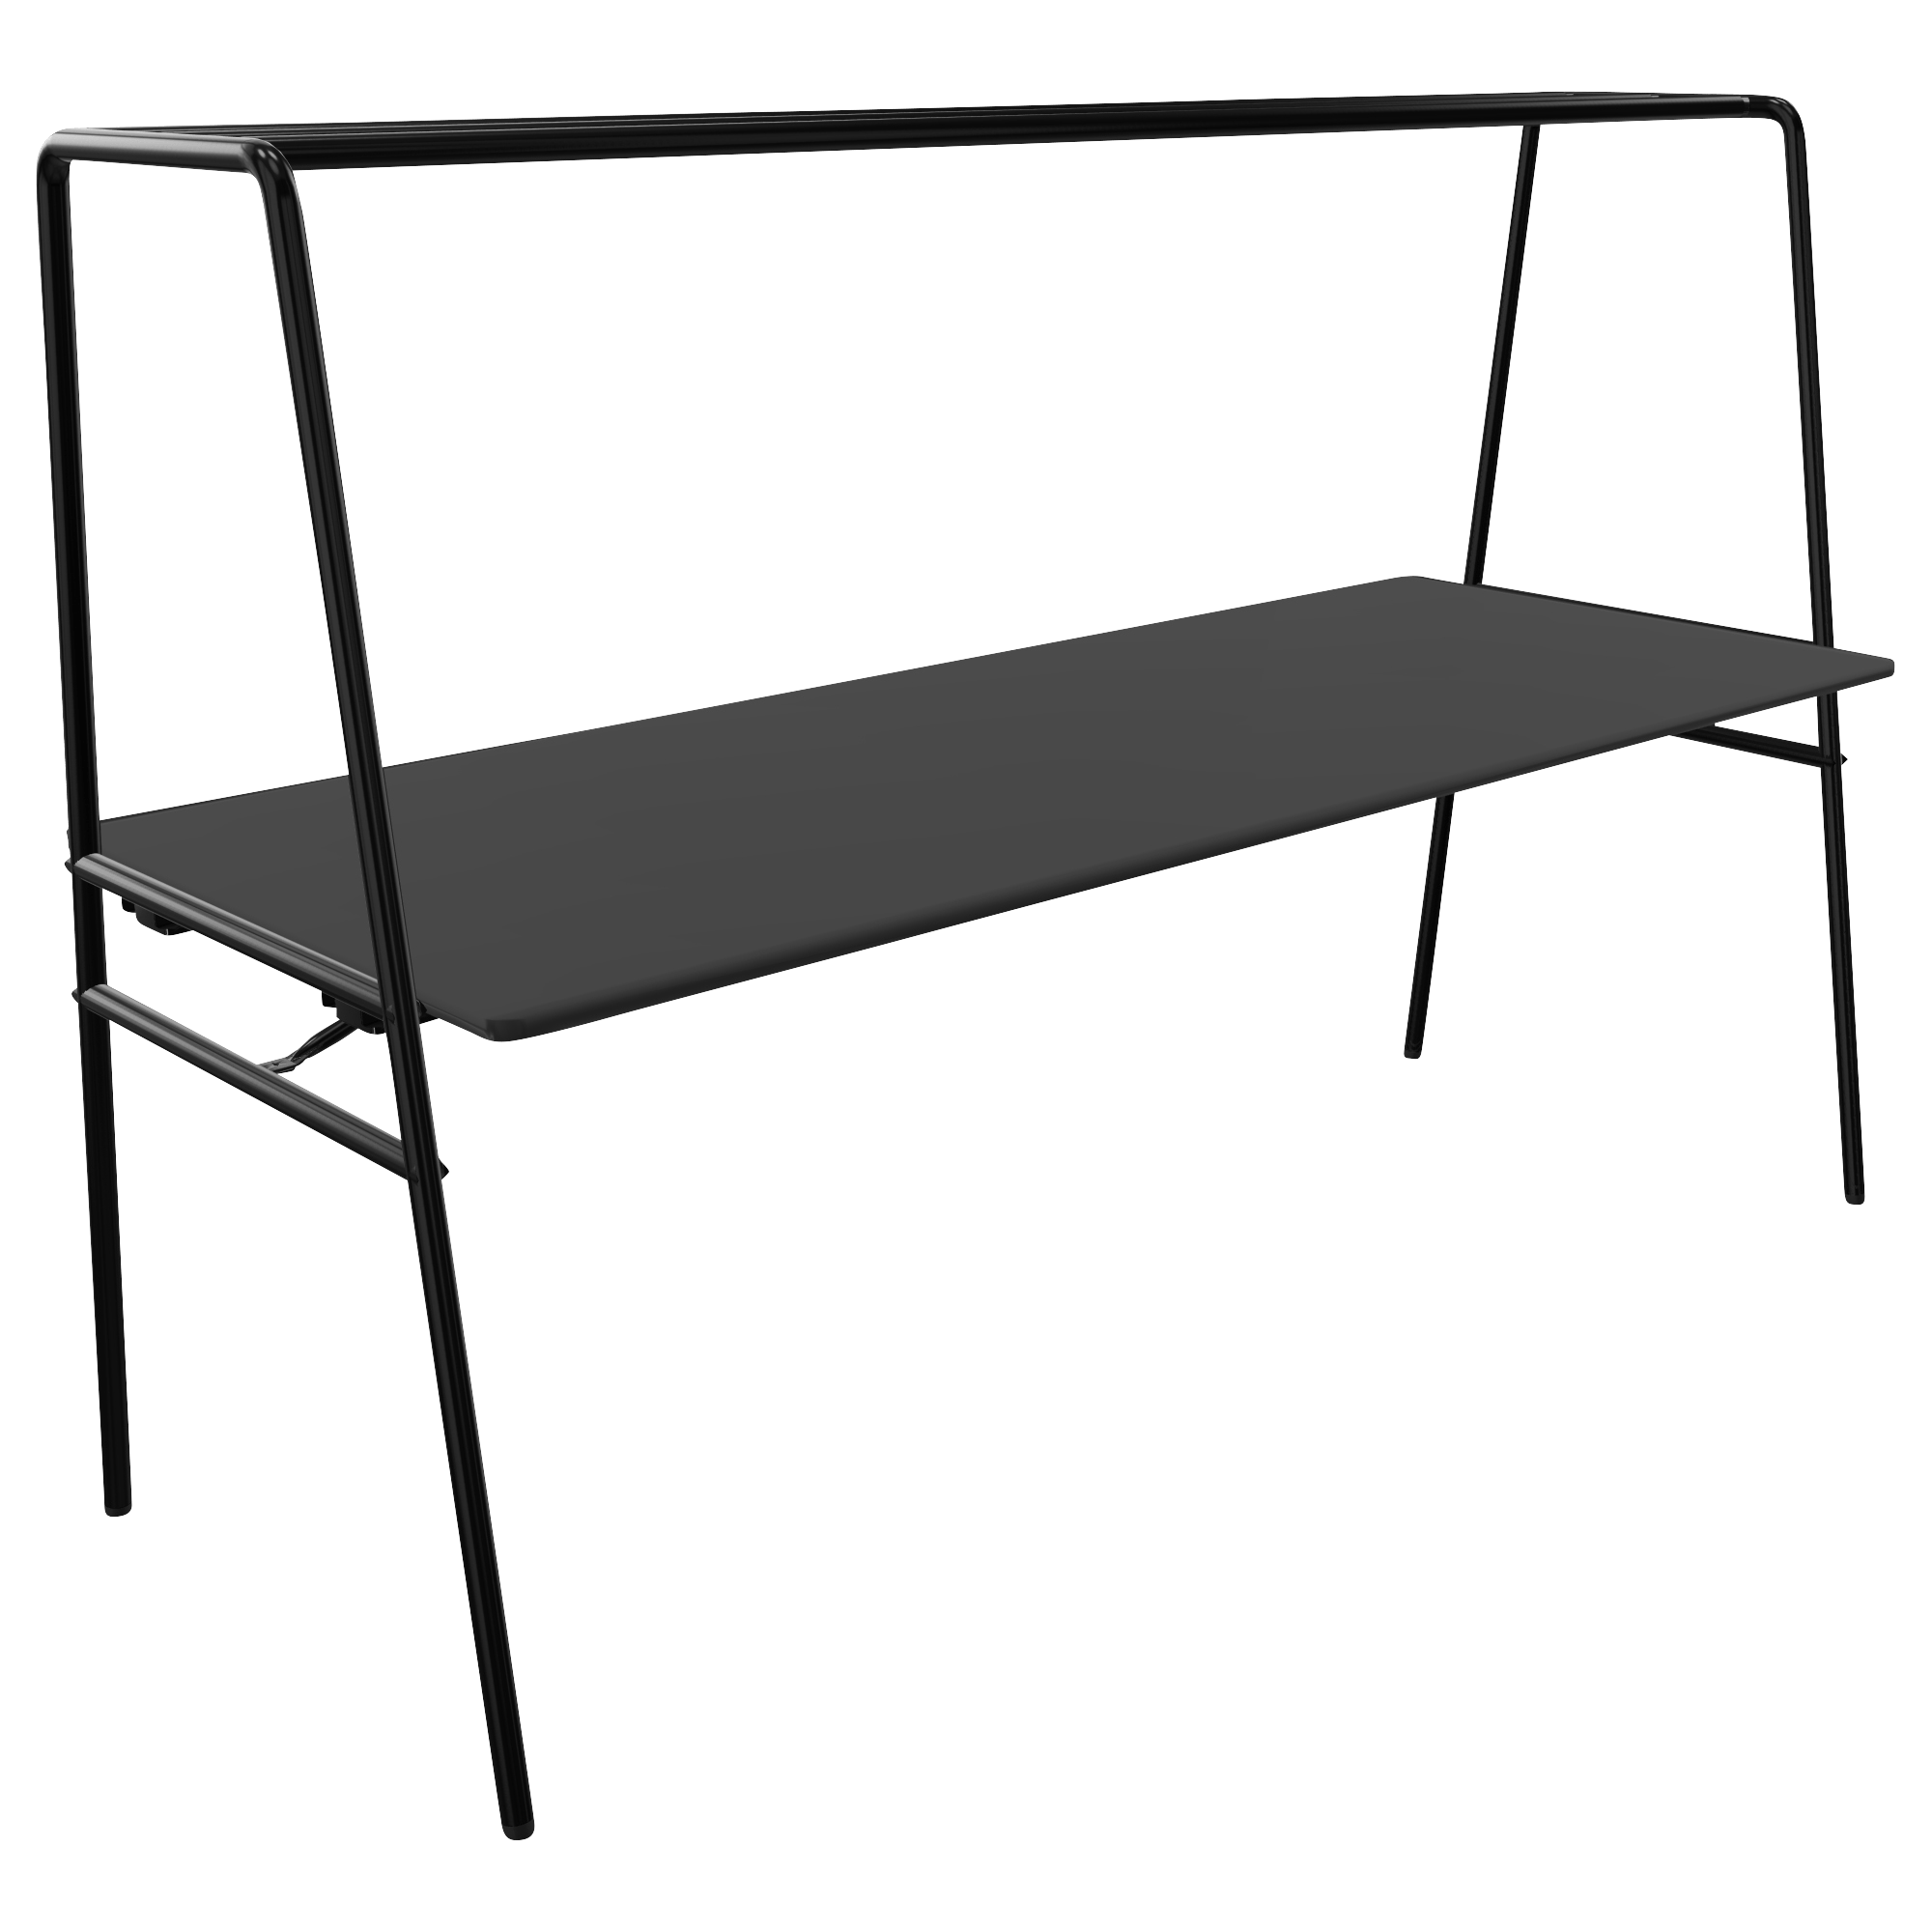 A long black table with a black frame.